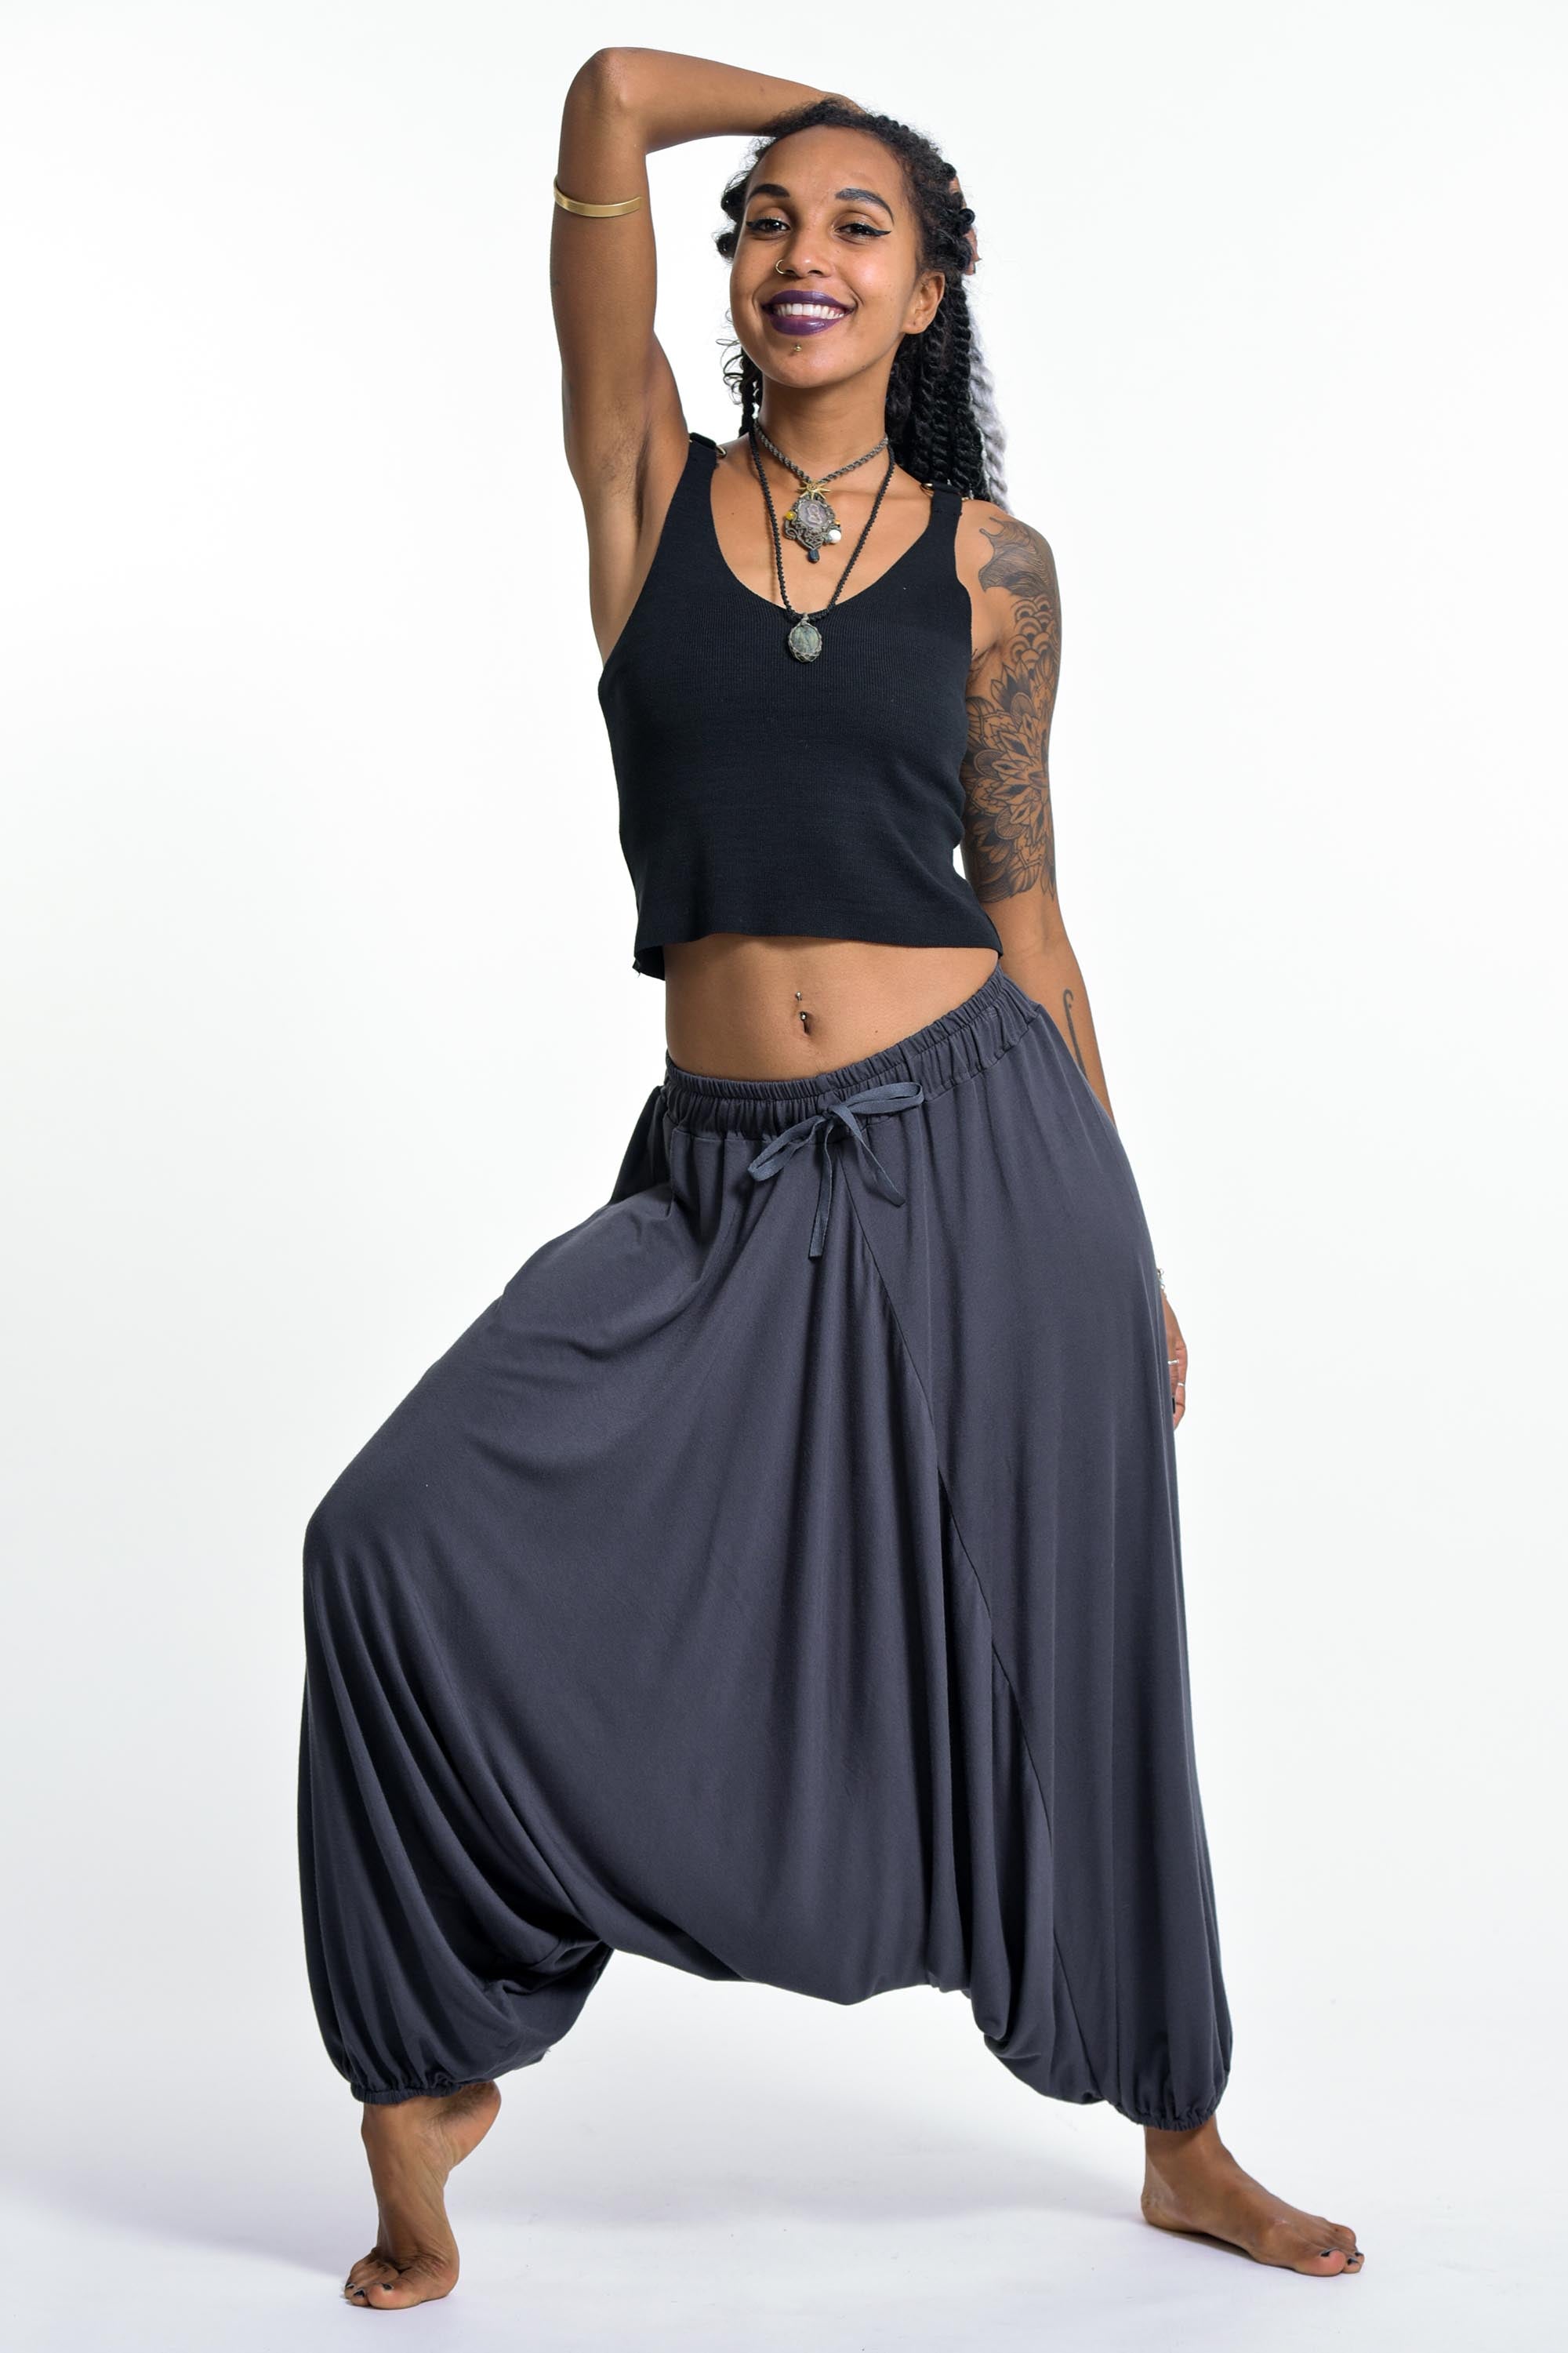 Drawstring Low Cut Harem Pants Cotton Spandex in Solid Gray